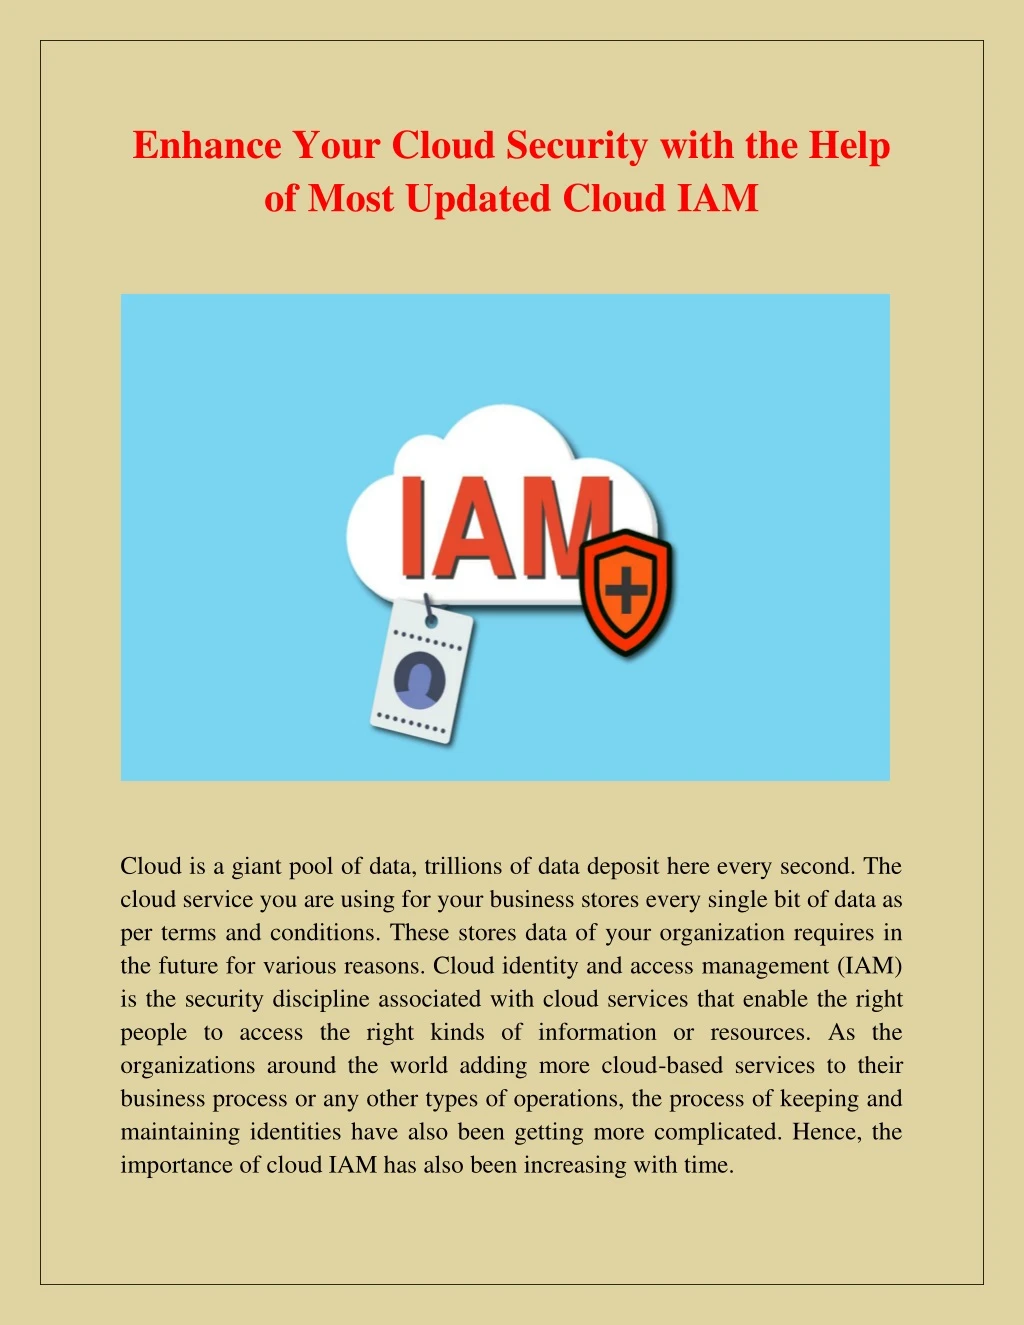 enhance your cloud security with the help of most